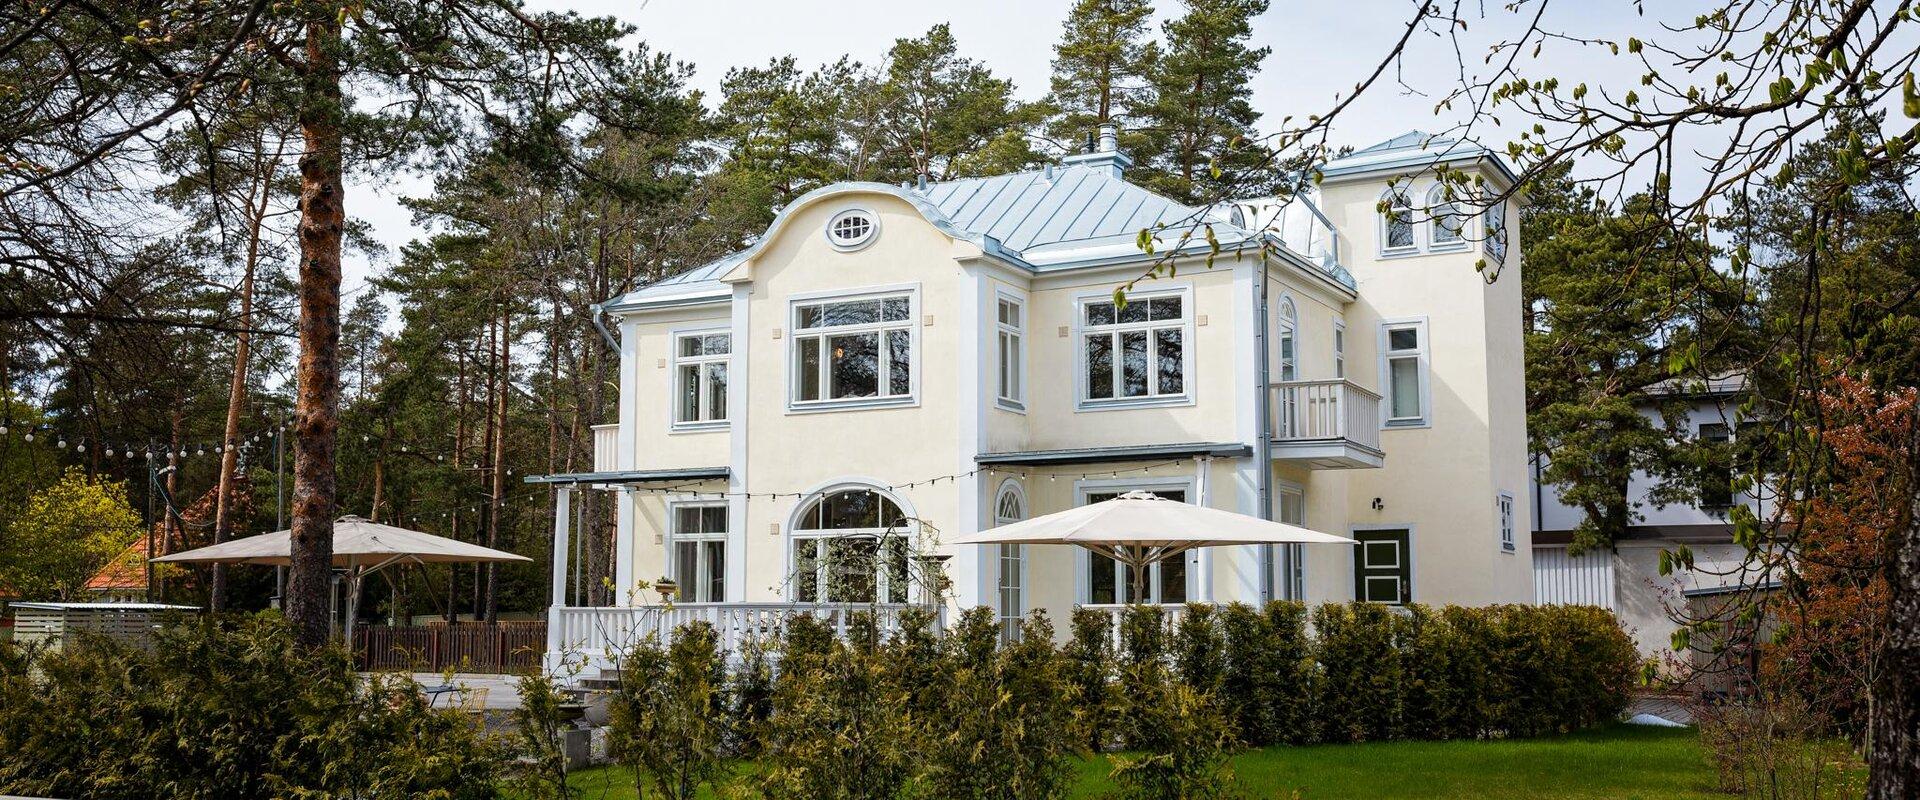 Paju Villa is a marvellous and luxurious villa in the residential district of Nõmme in Tallinn. It is a combination of beautiful interiors, heavenly f